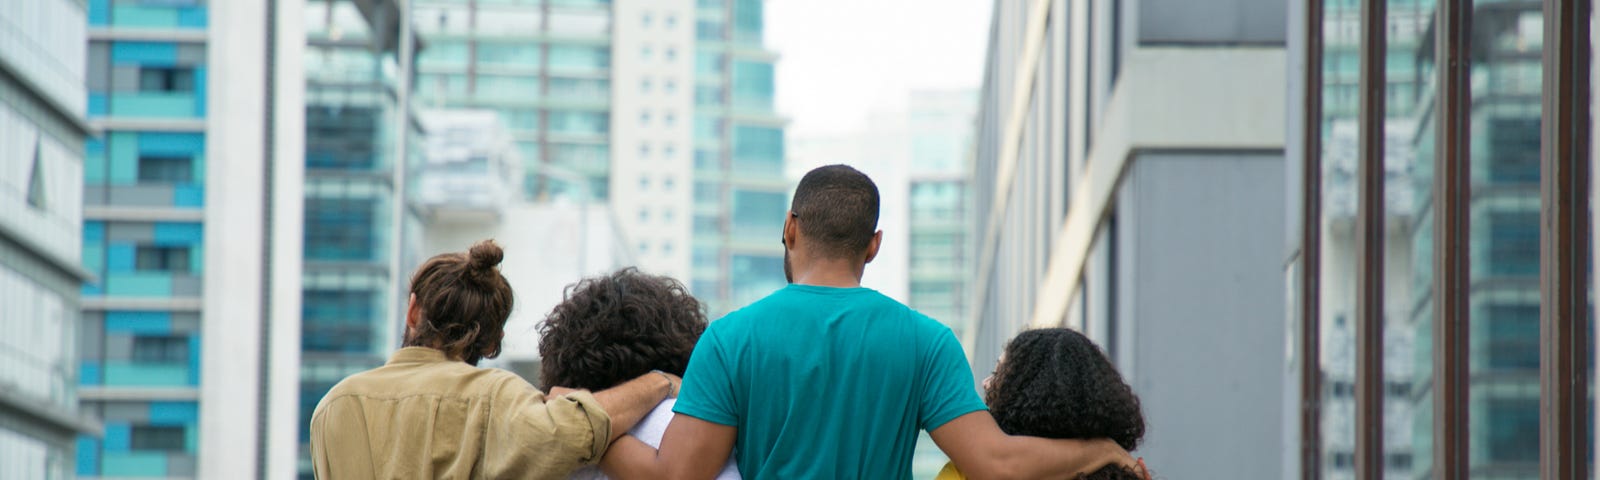 A group of four people, two men and two women, stand with their arms around each other with their backs to the camera. They are looking out across a city.